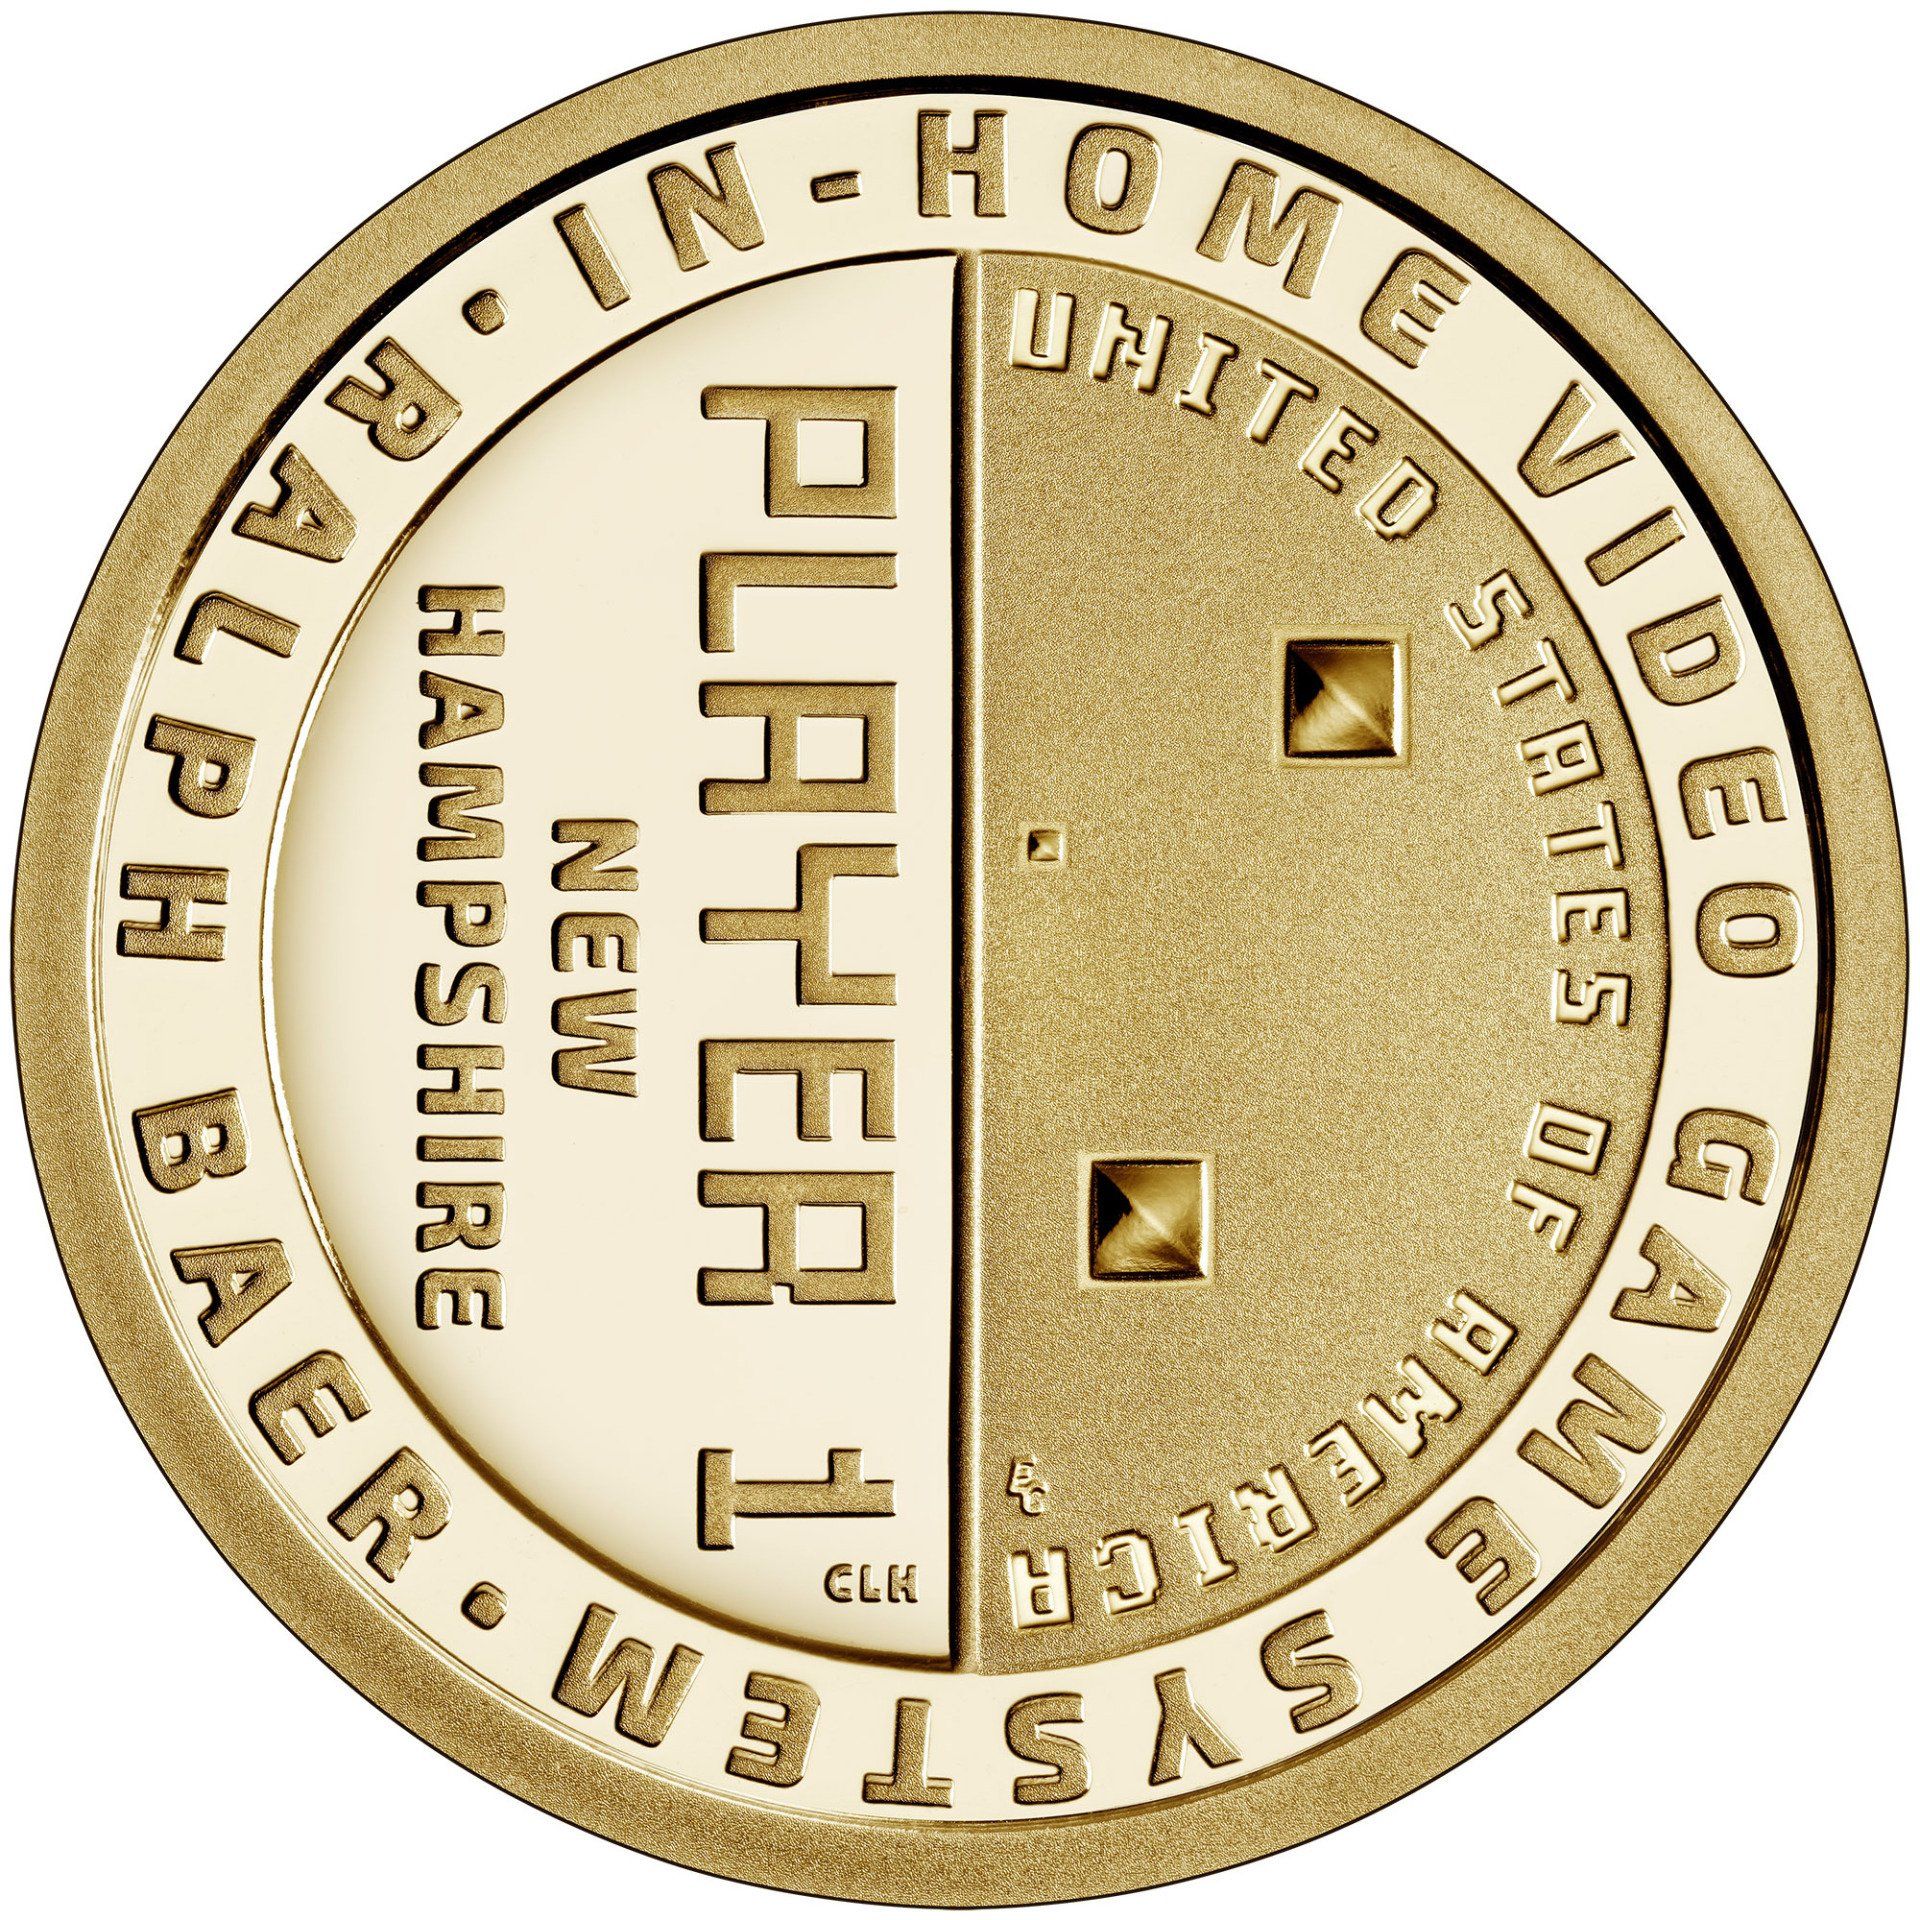 Reverse of the 2021 New Hampshire American Innovation $1 Coin depicts Ralph Baer’s brown box game “Handball” on the right side of the coin. The left side of the coin features “New Hampshire” and “Player 1” on an incused background.  United States Mint Image